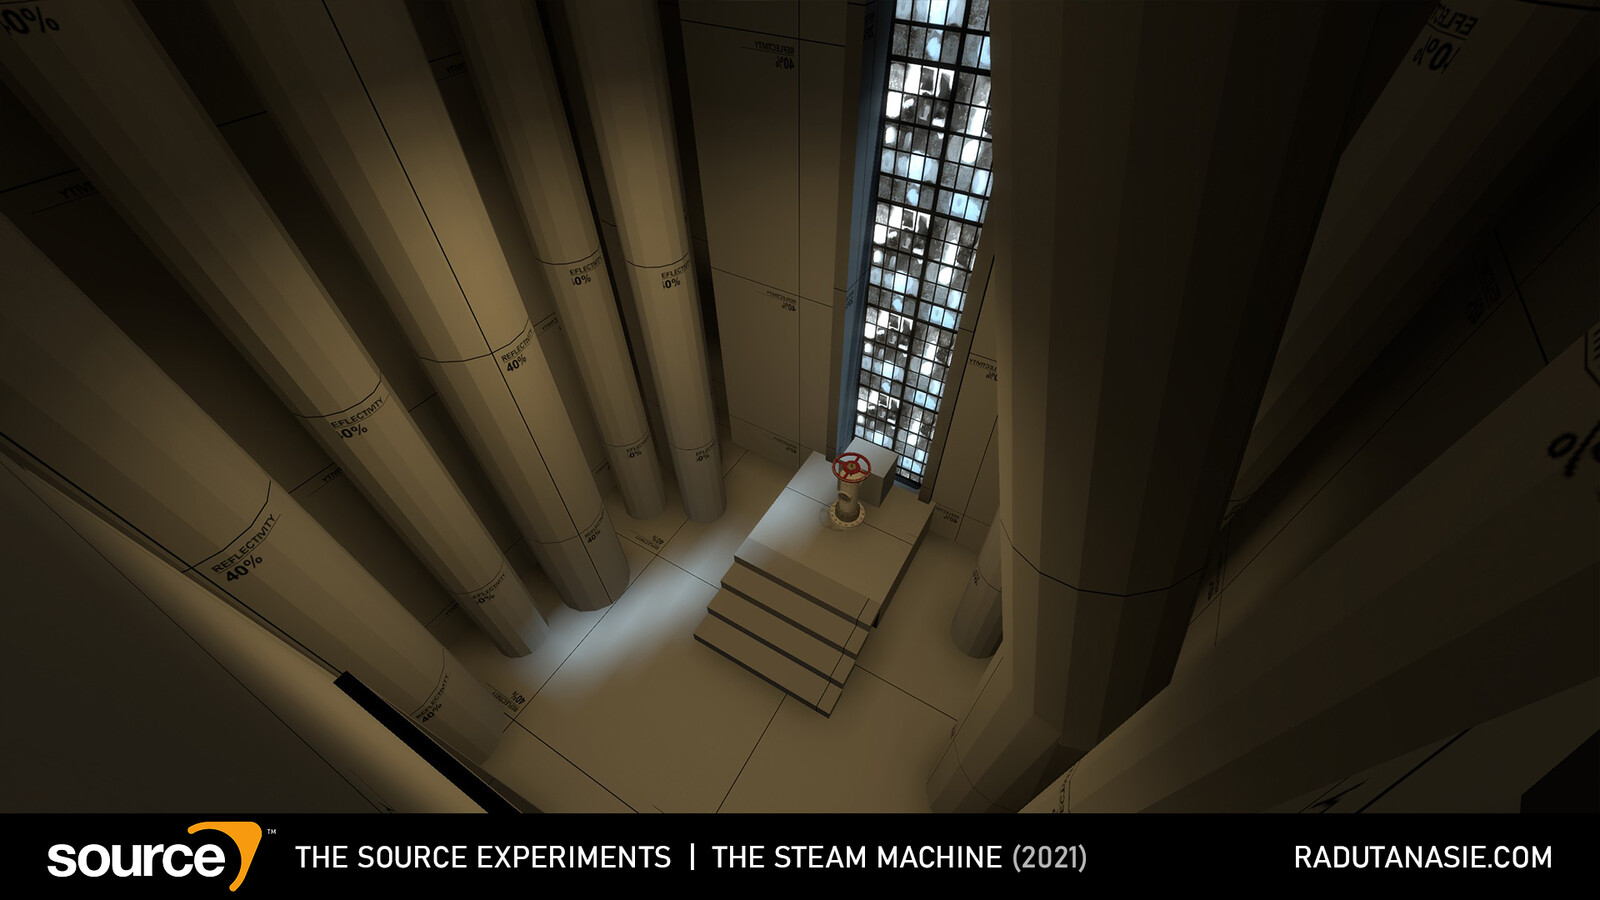 The main objective in the level, placed at the top of a tall building, is the red valve that controls the steam machine, a sprawling conglomerate of pipes that keep the town foggy.